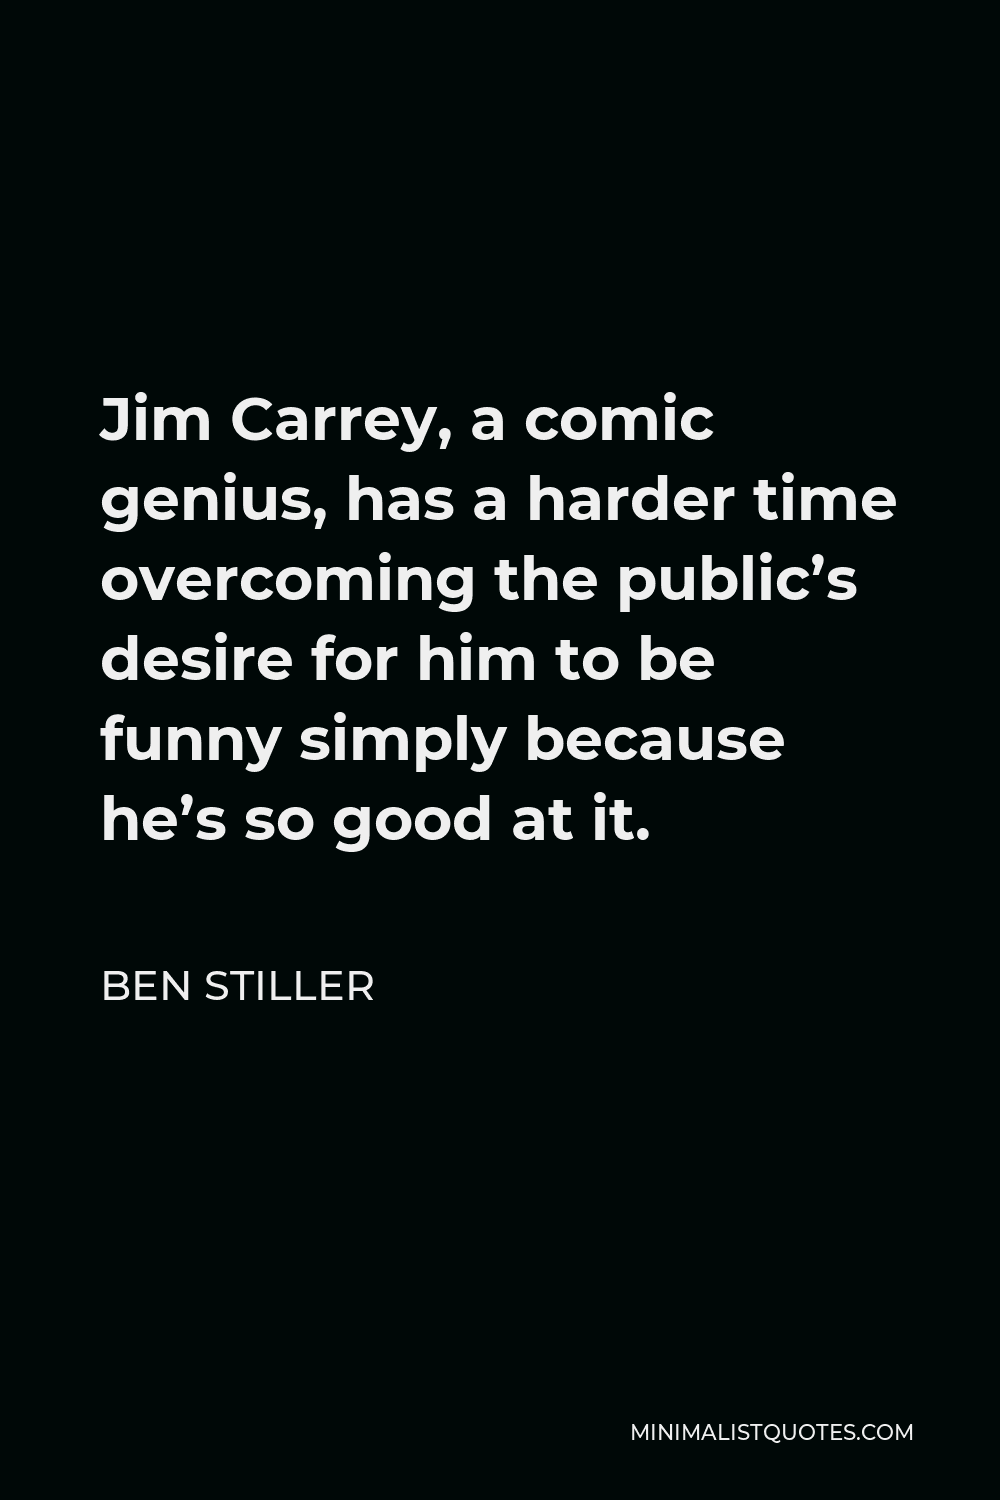 Ben Stiller Quote - Jim Carrey, a comic genius, has a harder time overcoming the public’s desire for him to be funny simply because he’s so good at it.